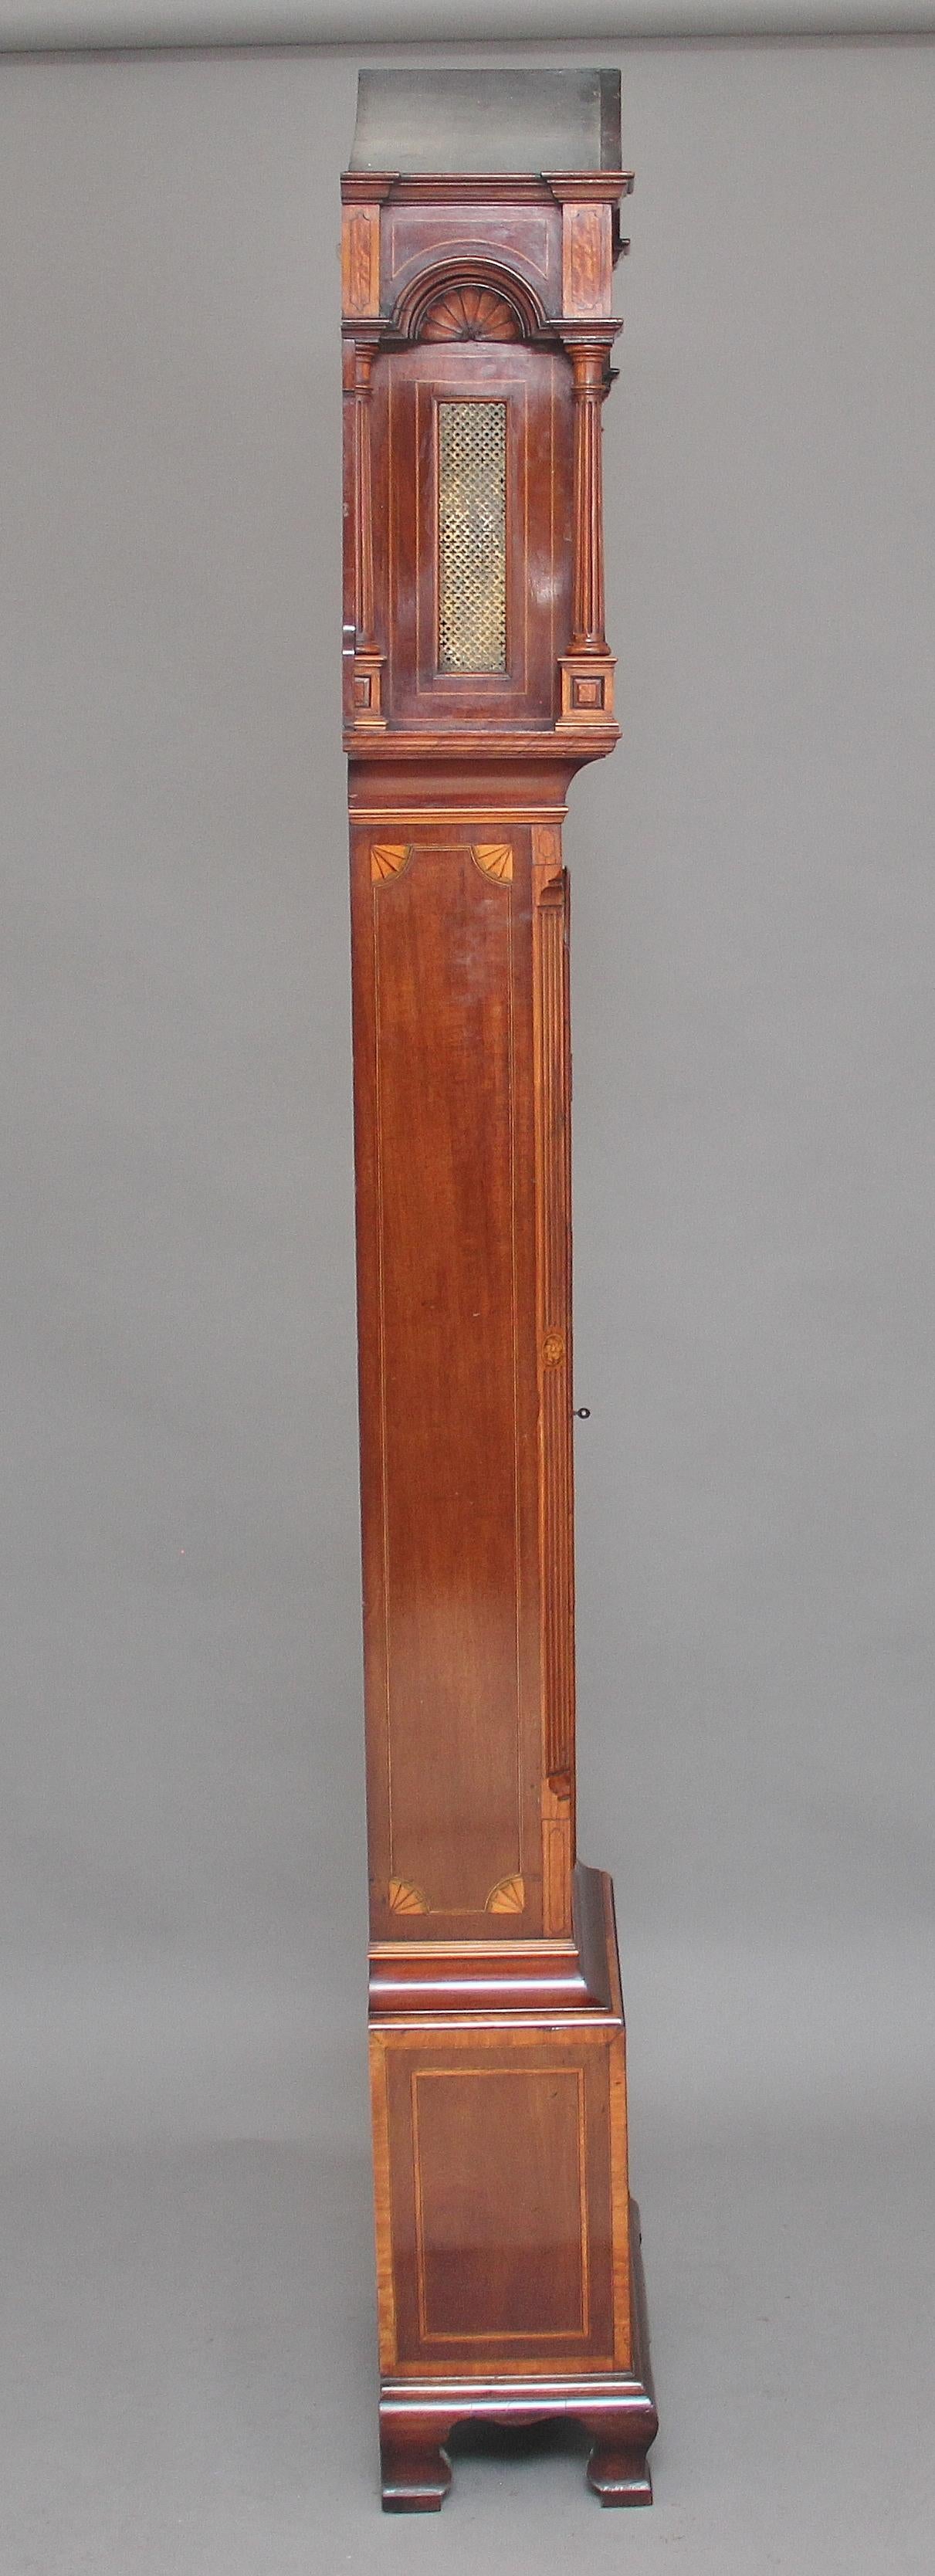 Early 20th Century Inlaid Mahogany Longcase Clock In Good Condition For Sale In Martlesham, GB